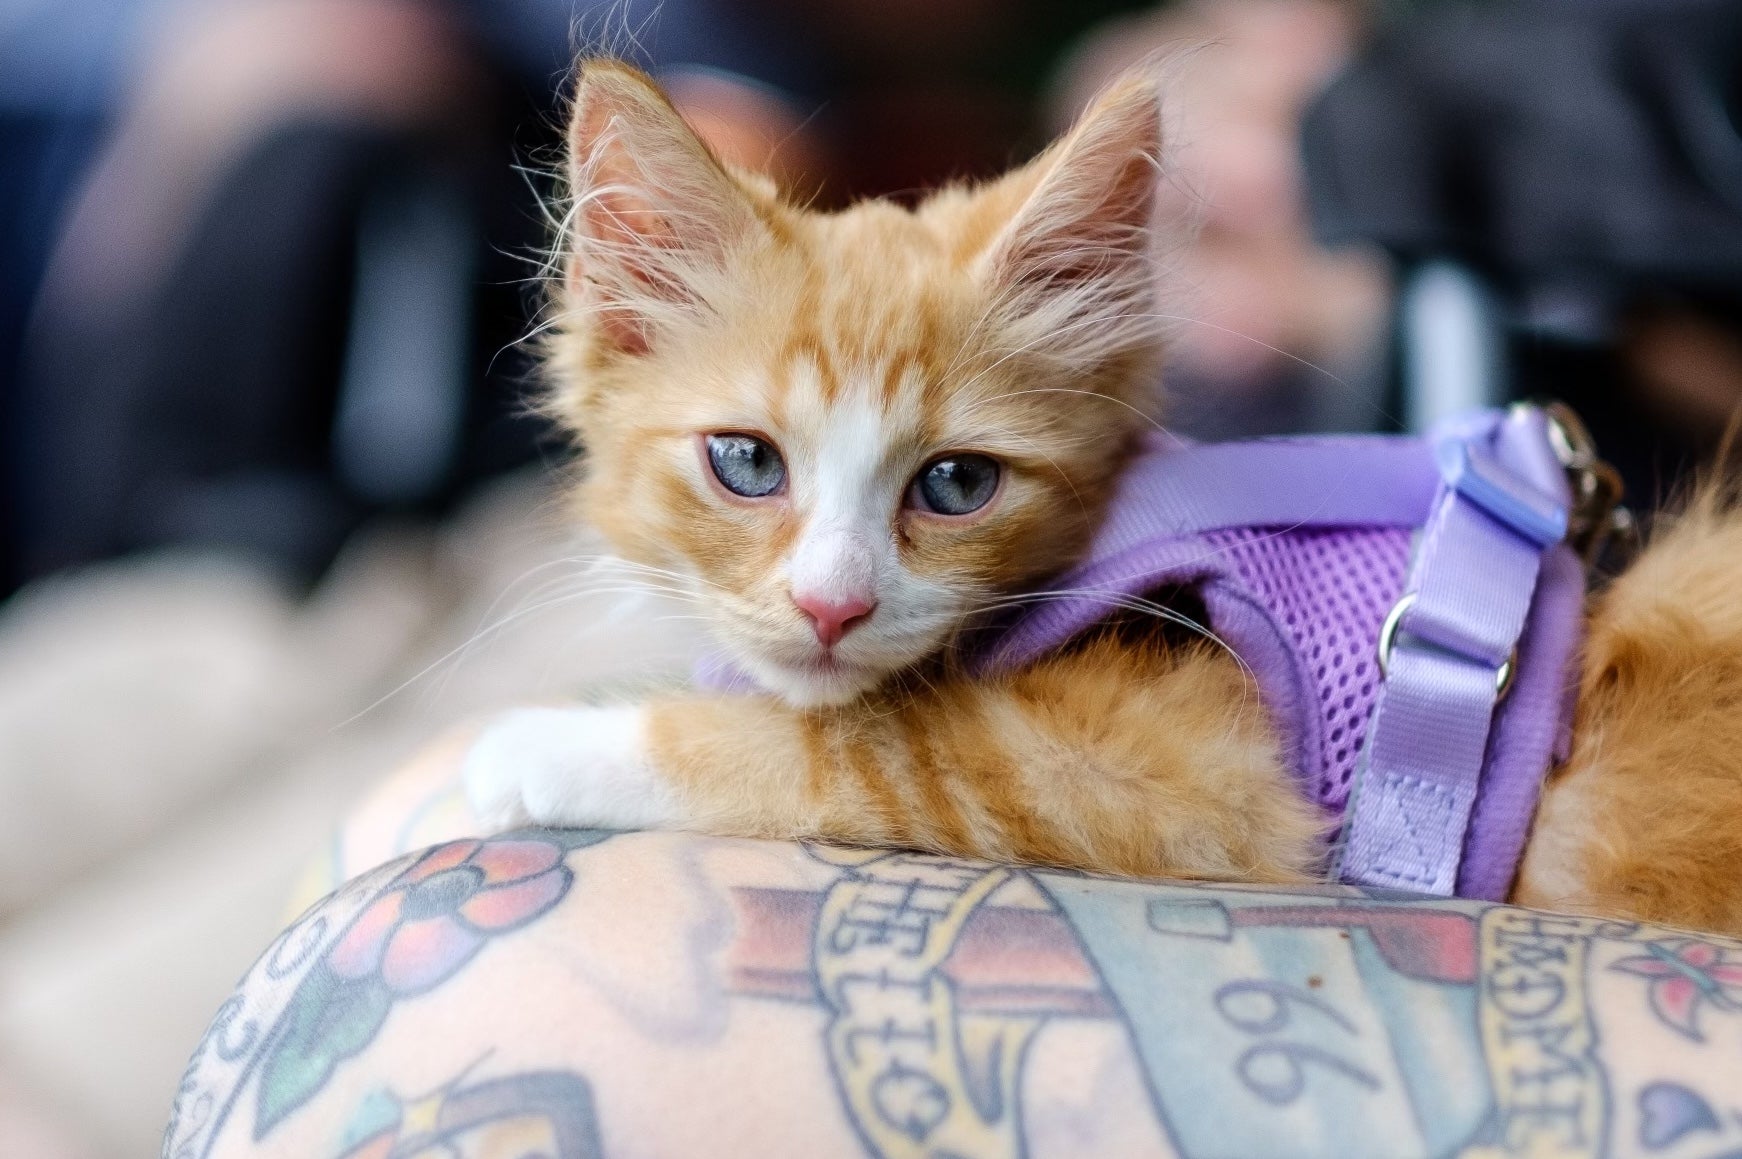 15 Cuddly Kittens You'll Want to Snuggle All Day